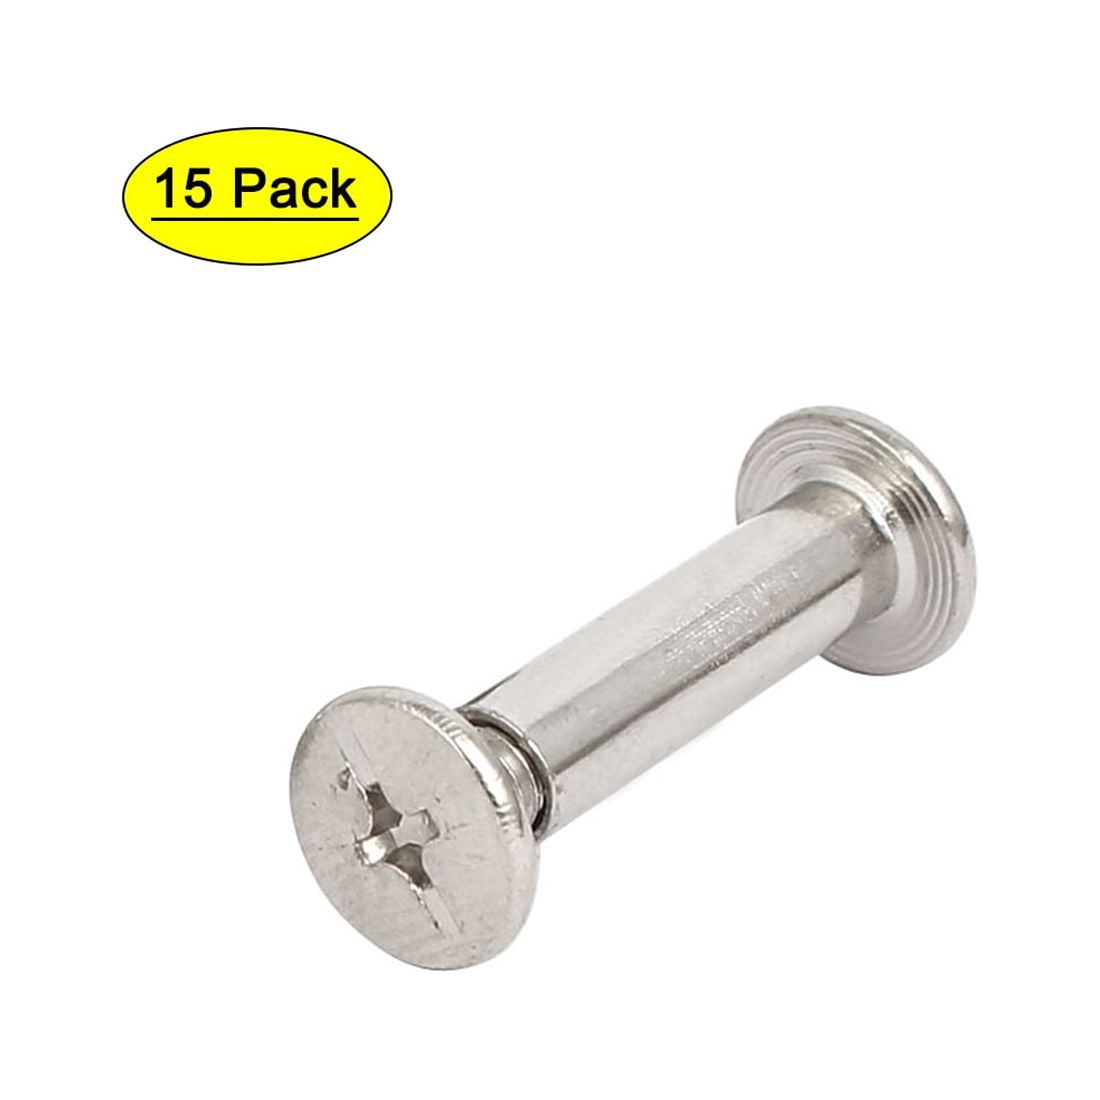 Nickel Plated' 15 x 5 mm Chicago Screw